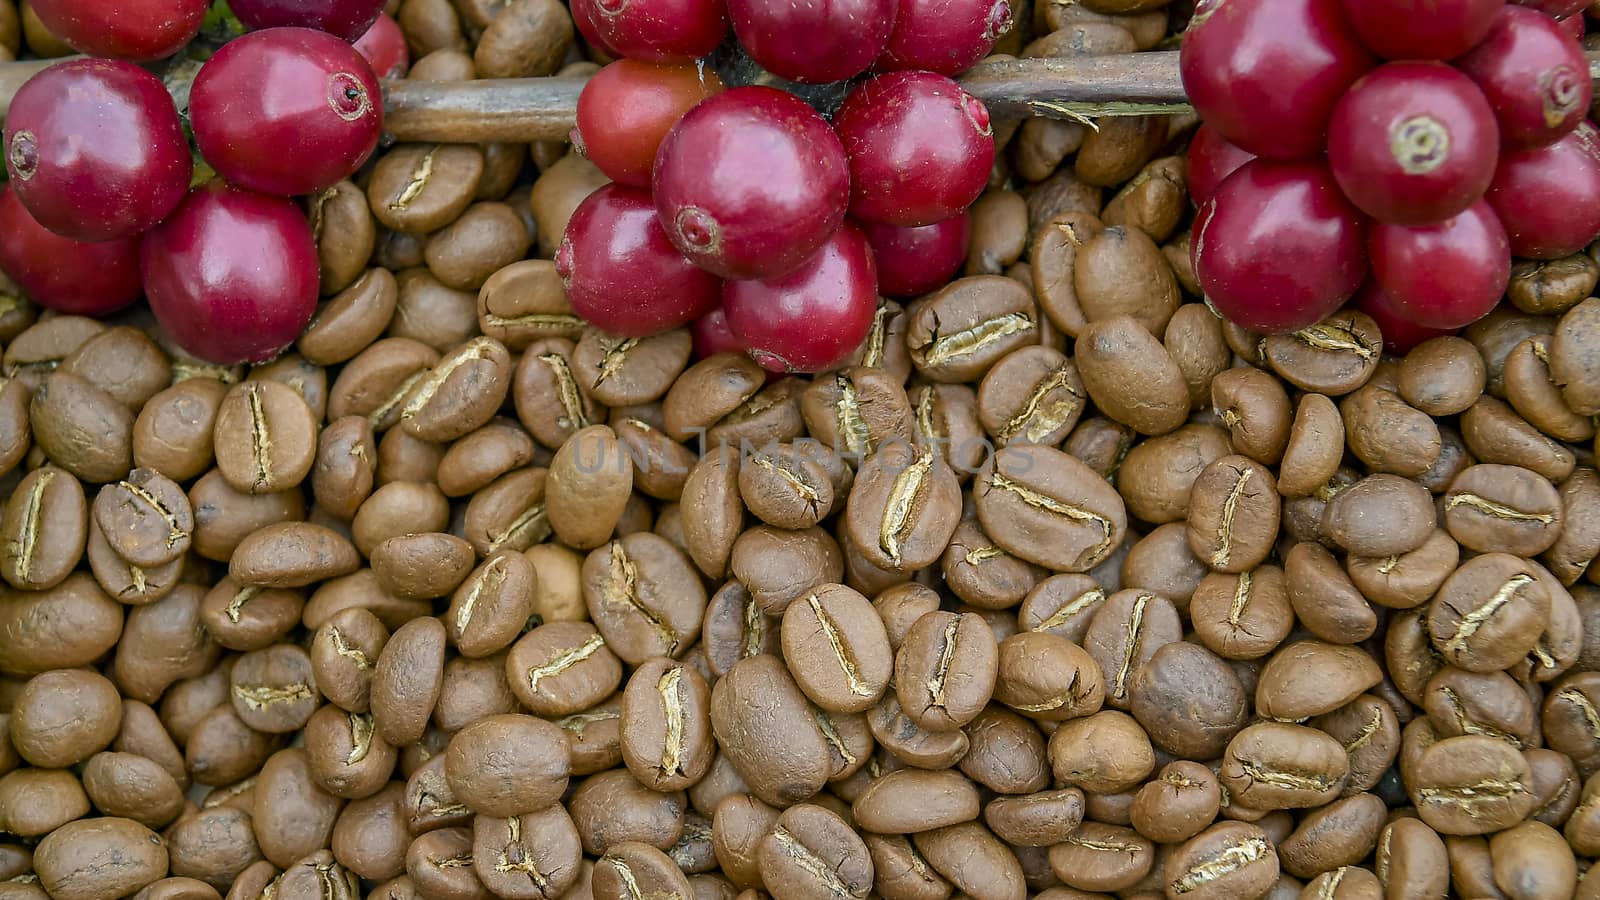 Fresh coffee cherry, red coffee beans on roasted coffee bean texture background, ripe and unripe berries.